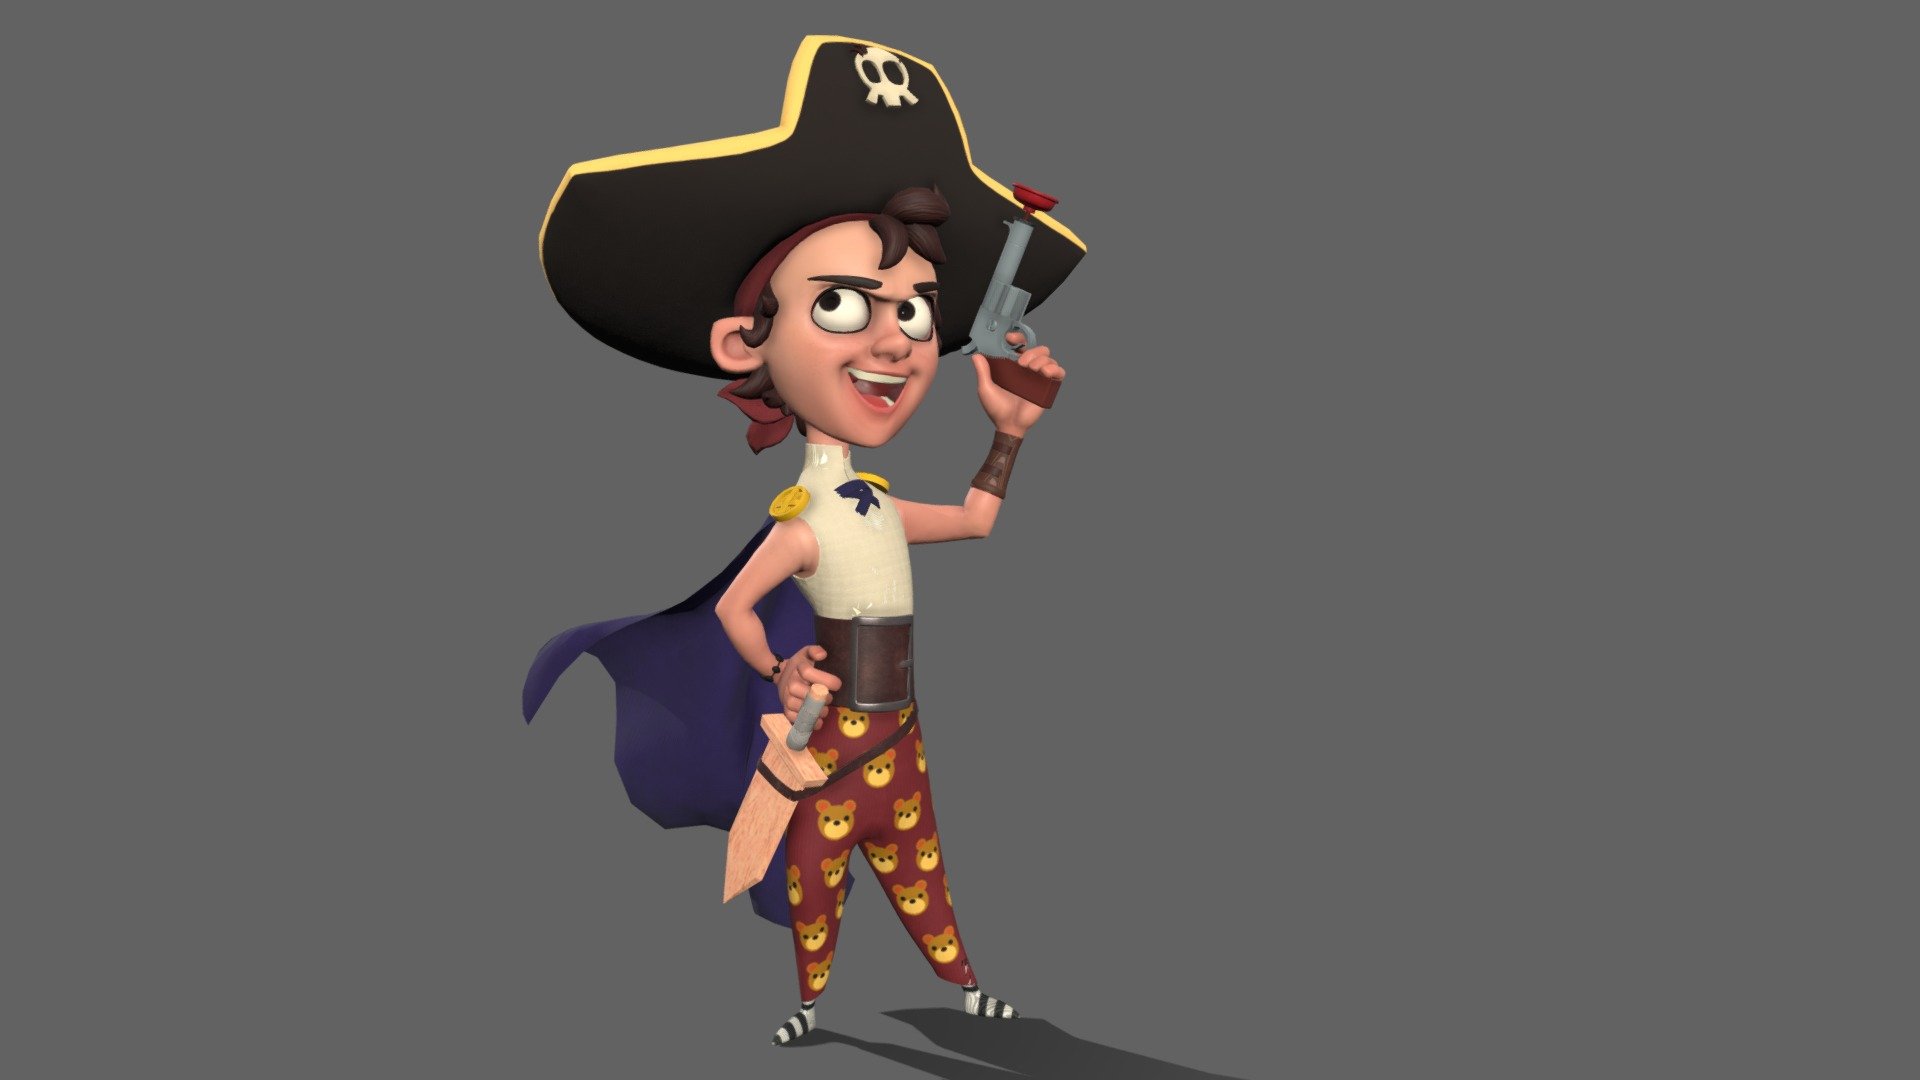 Here's an old pirate project from about 3 years ago that I decided to redo. The model is based off a concept by Puba24. It was modeled with Zbrush and Maya. Textured with Substance 3D Painter 3d model